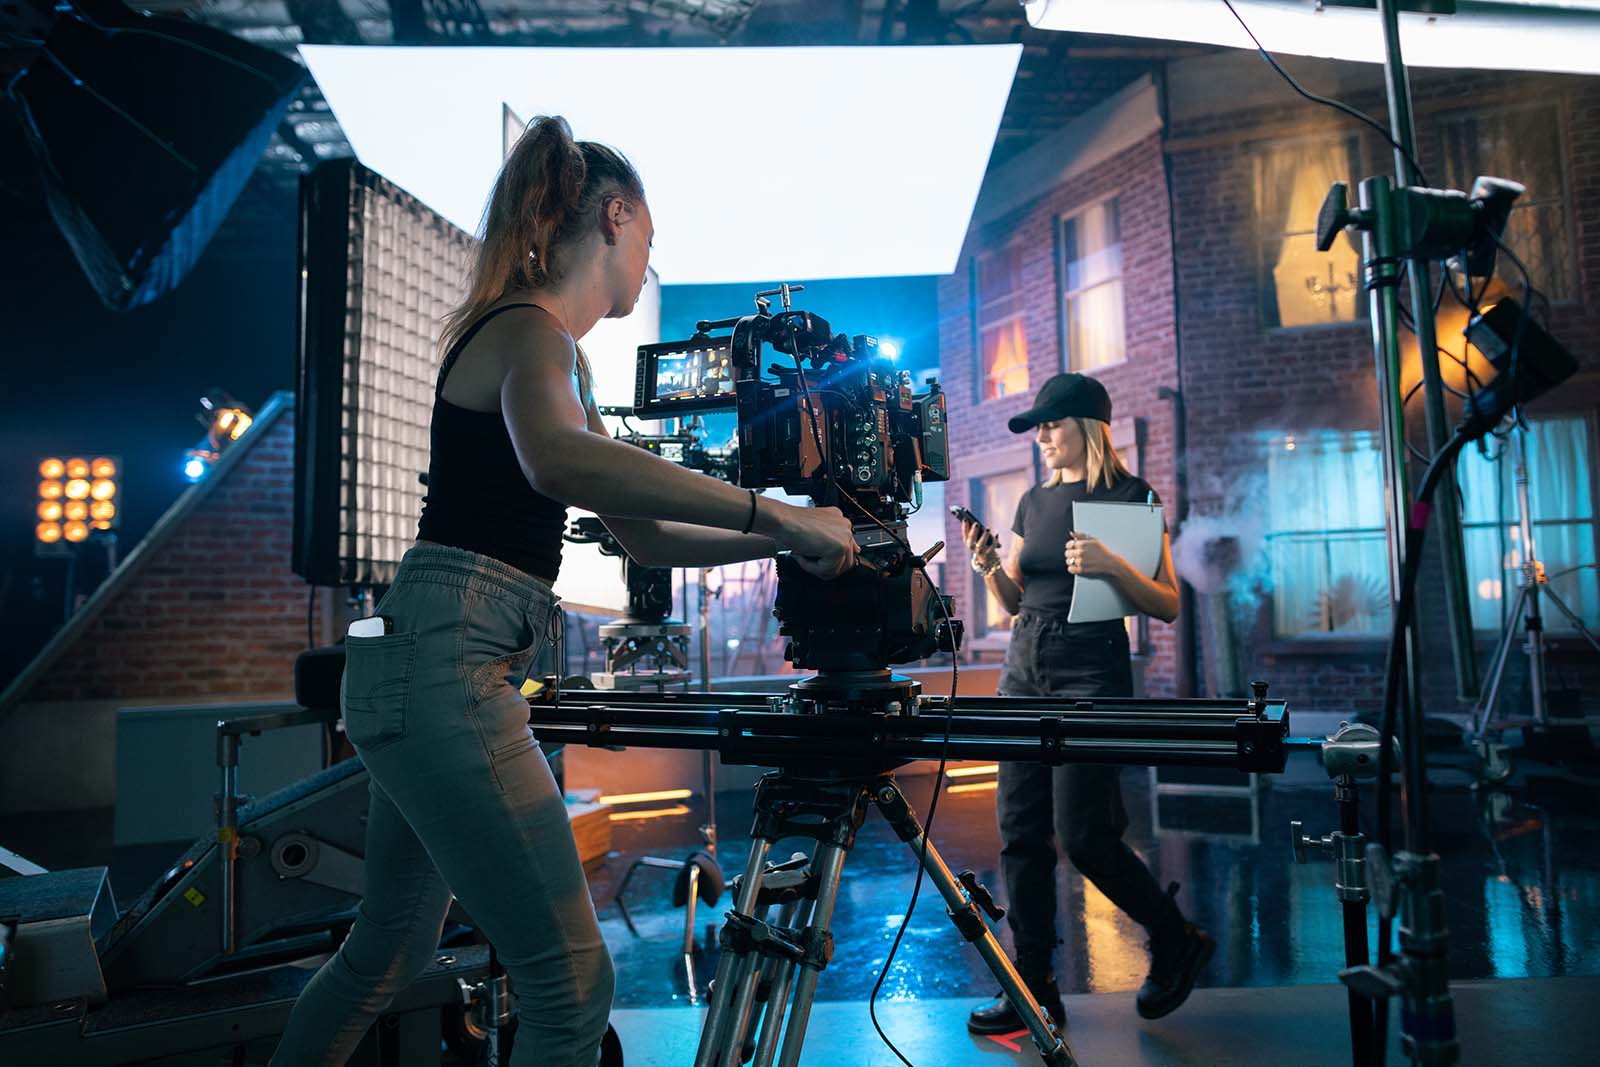 Our production team—including cinematographer Alissa Rooney (L) and producer Becca Dobyns—lives and works in Frame.io.